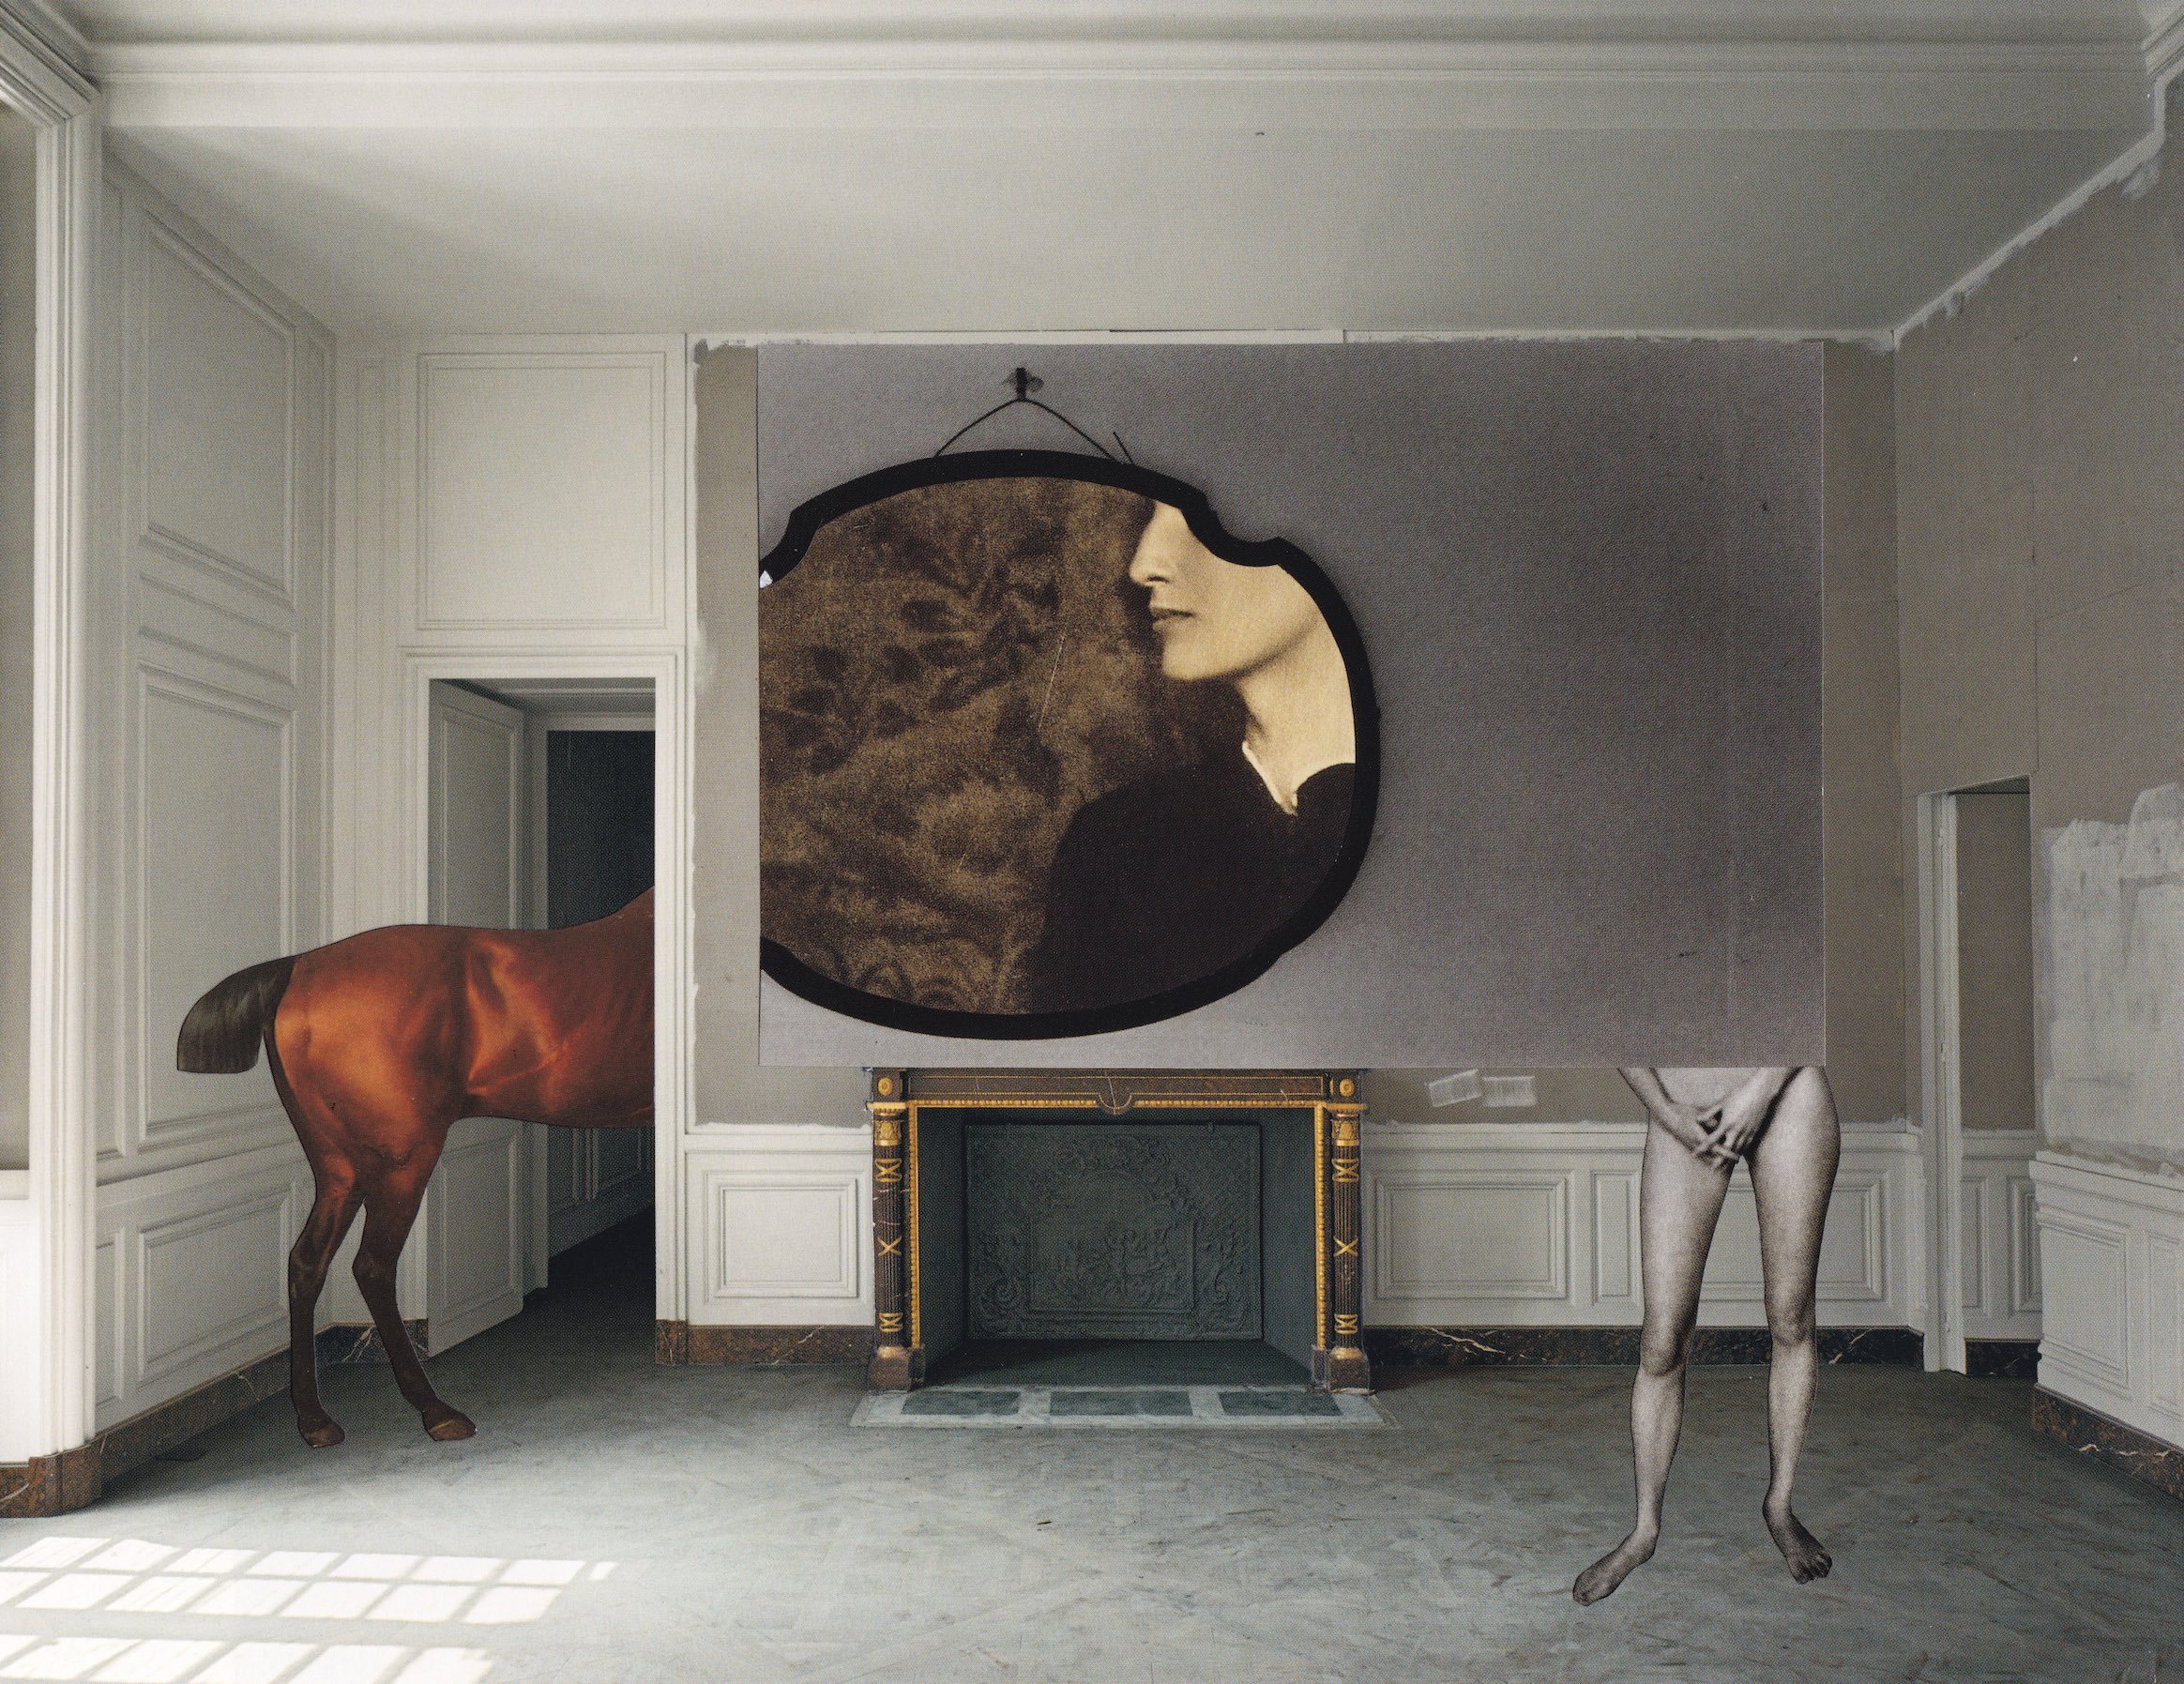 La vie en collage: these surreal artworks are a poetic interrogation of reality